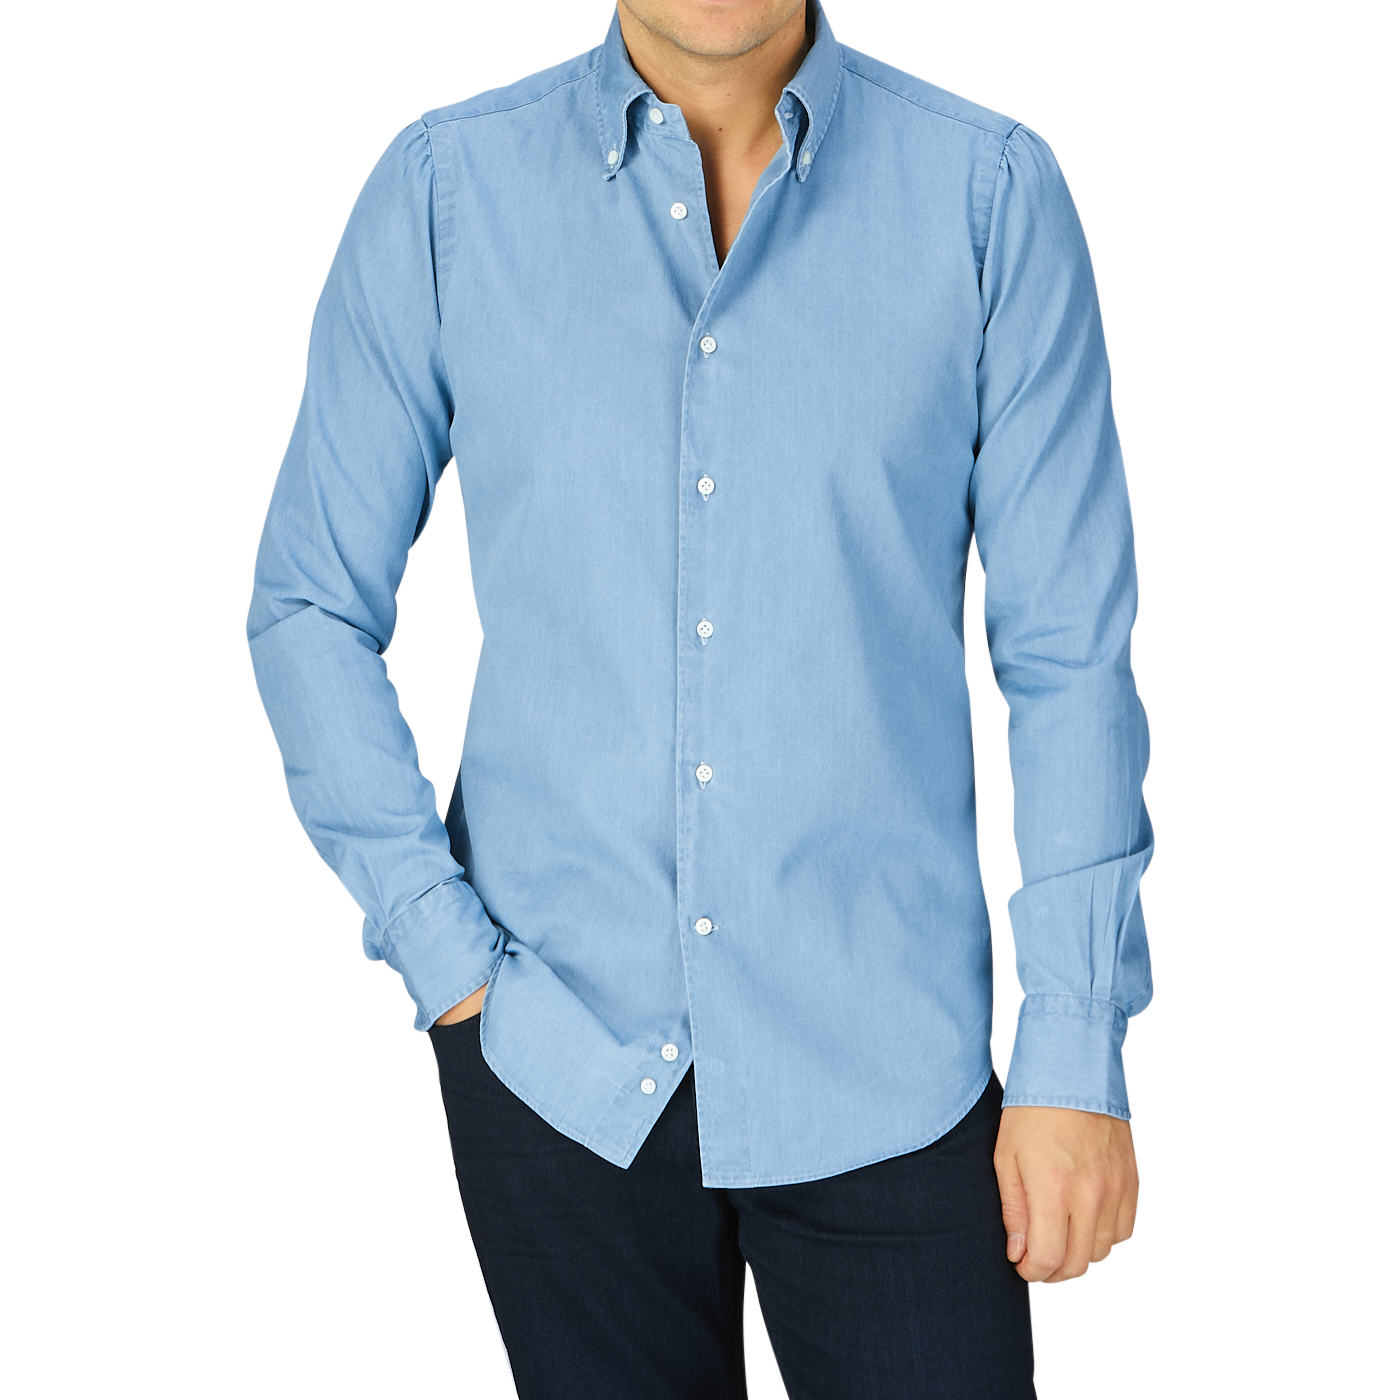 A man wearing a Mazzarelli Light Blue Washed Denim BD Slim Shirt and dark pants against a grey background.